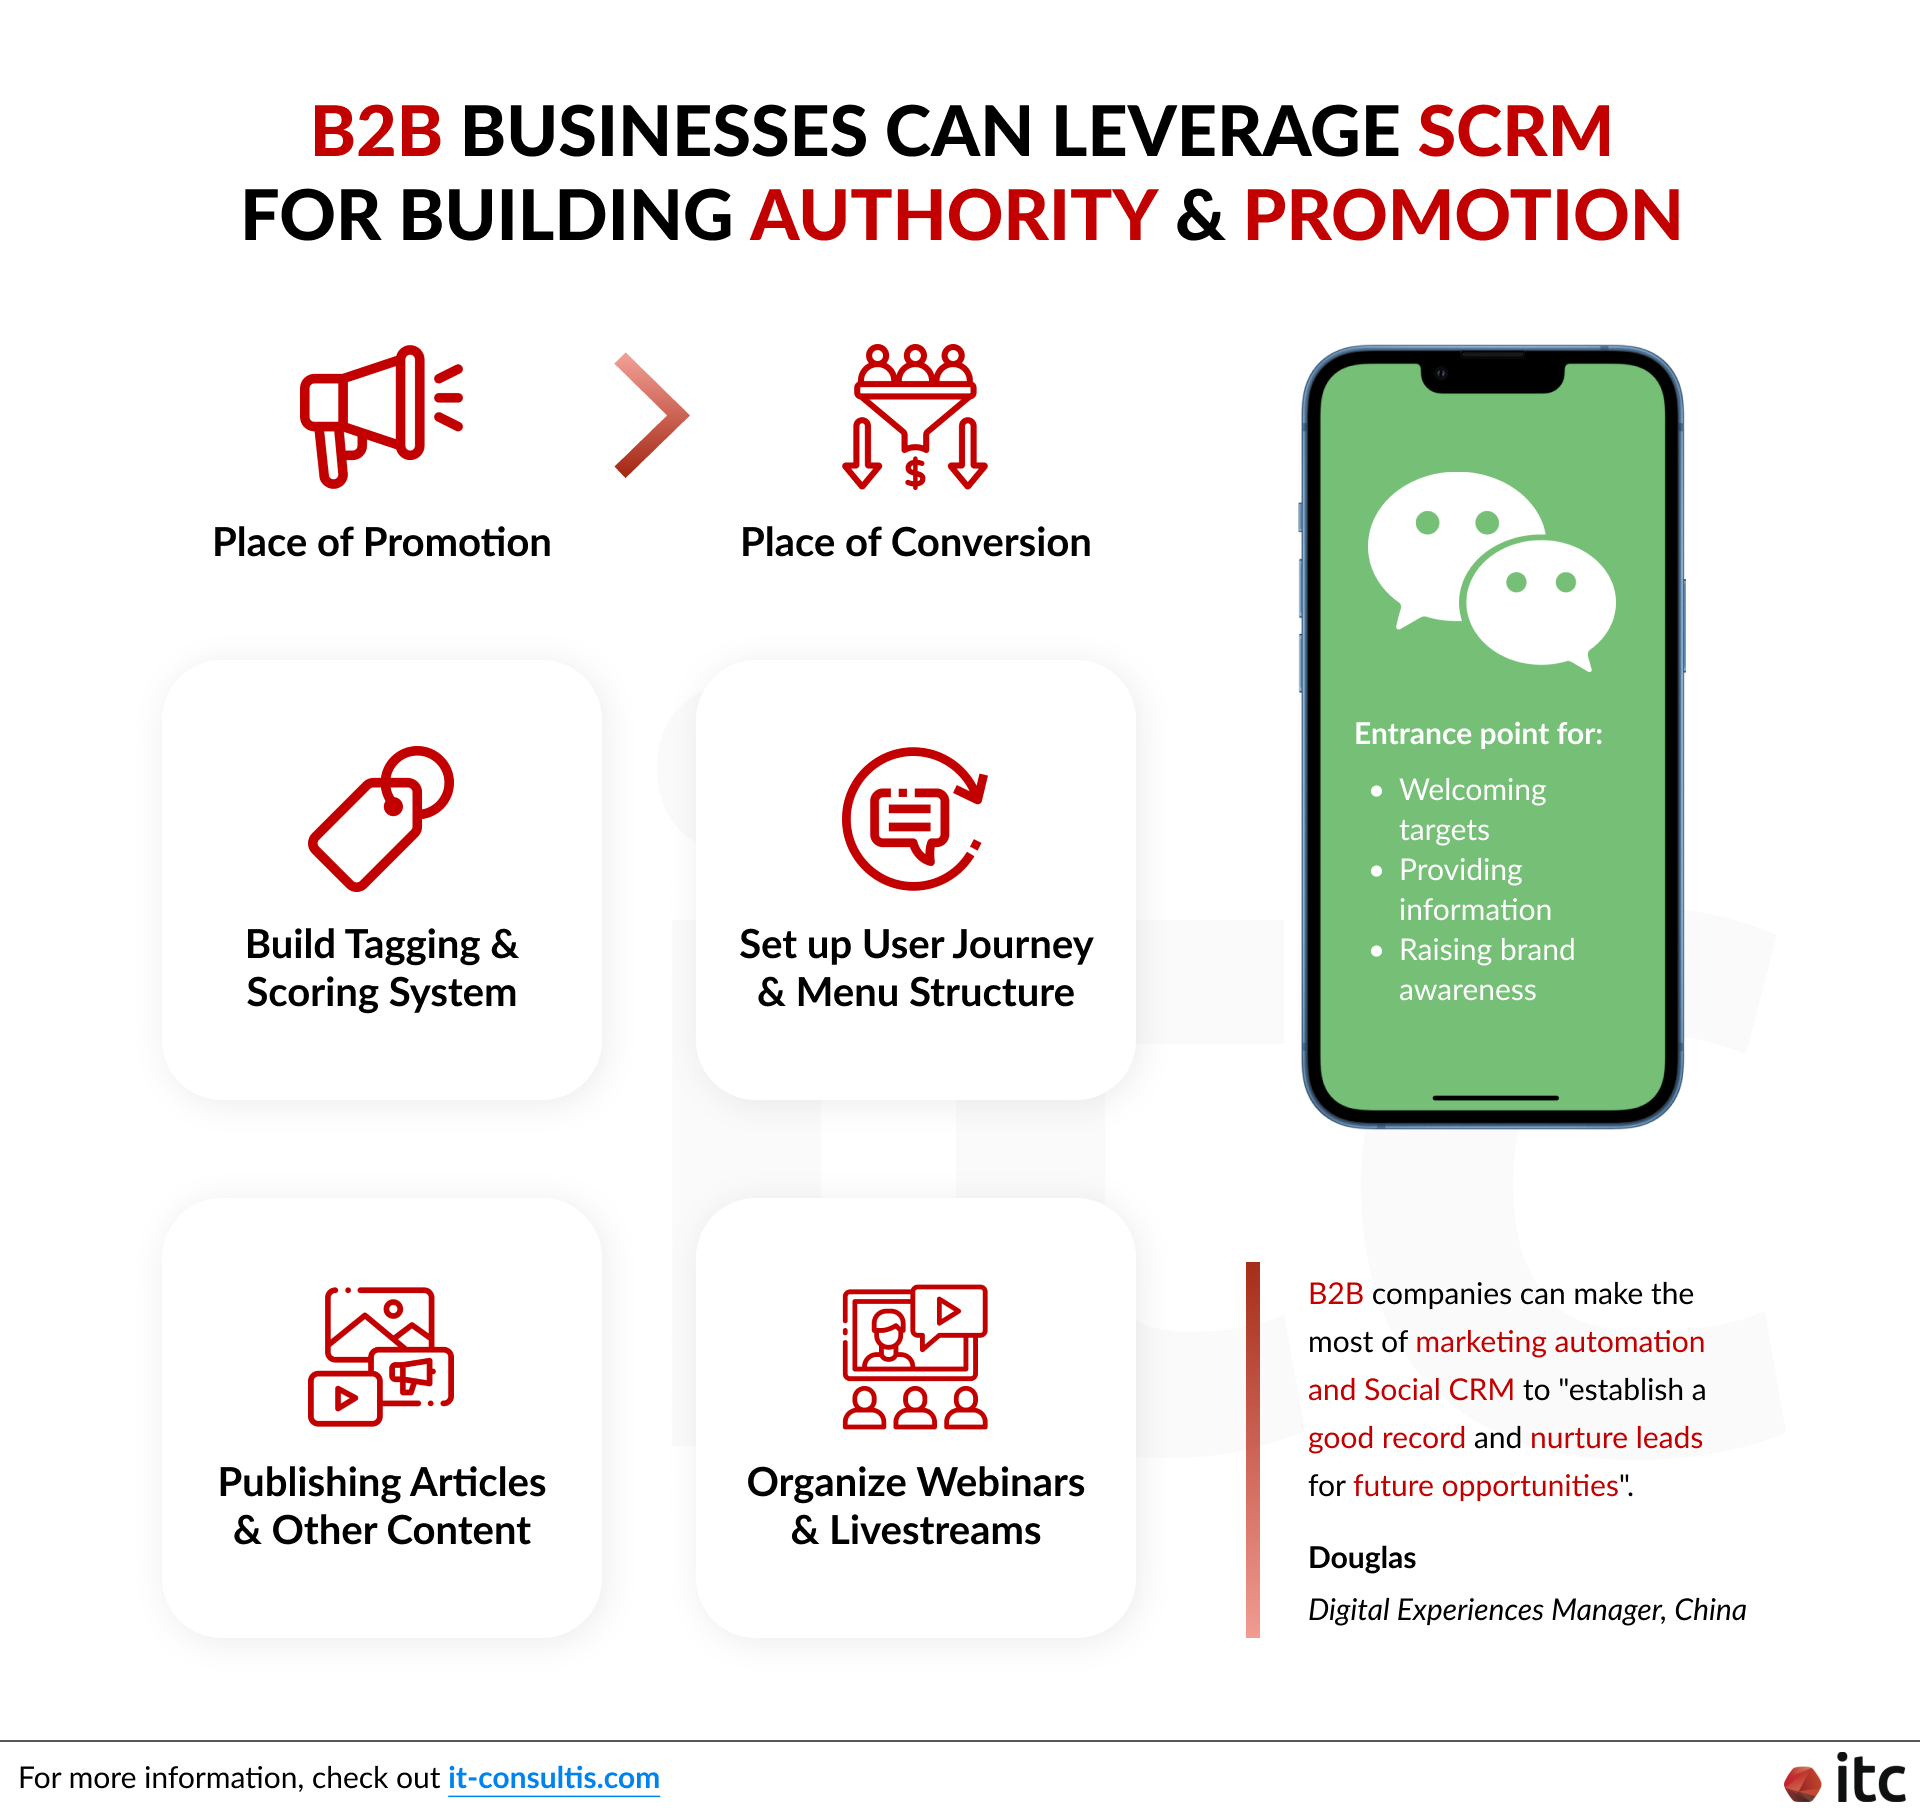 B2B businesses can leverage sCRM for building authority and promotion as WeChat is less likely regarded as the place of conversion. Companies can leverage marketing automation and social CRM to set up automatic responses and publishing articles on WeChat Official Account, organize webinars and livestreams, and build tagging and scoring system for lead segmentation